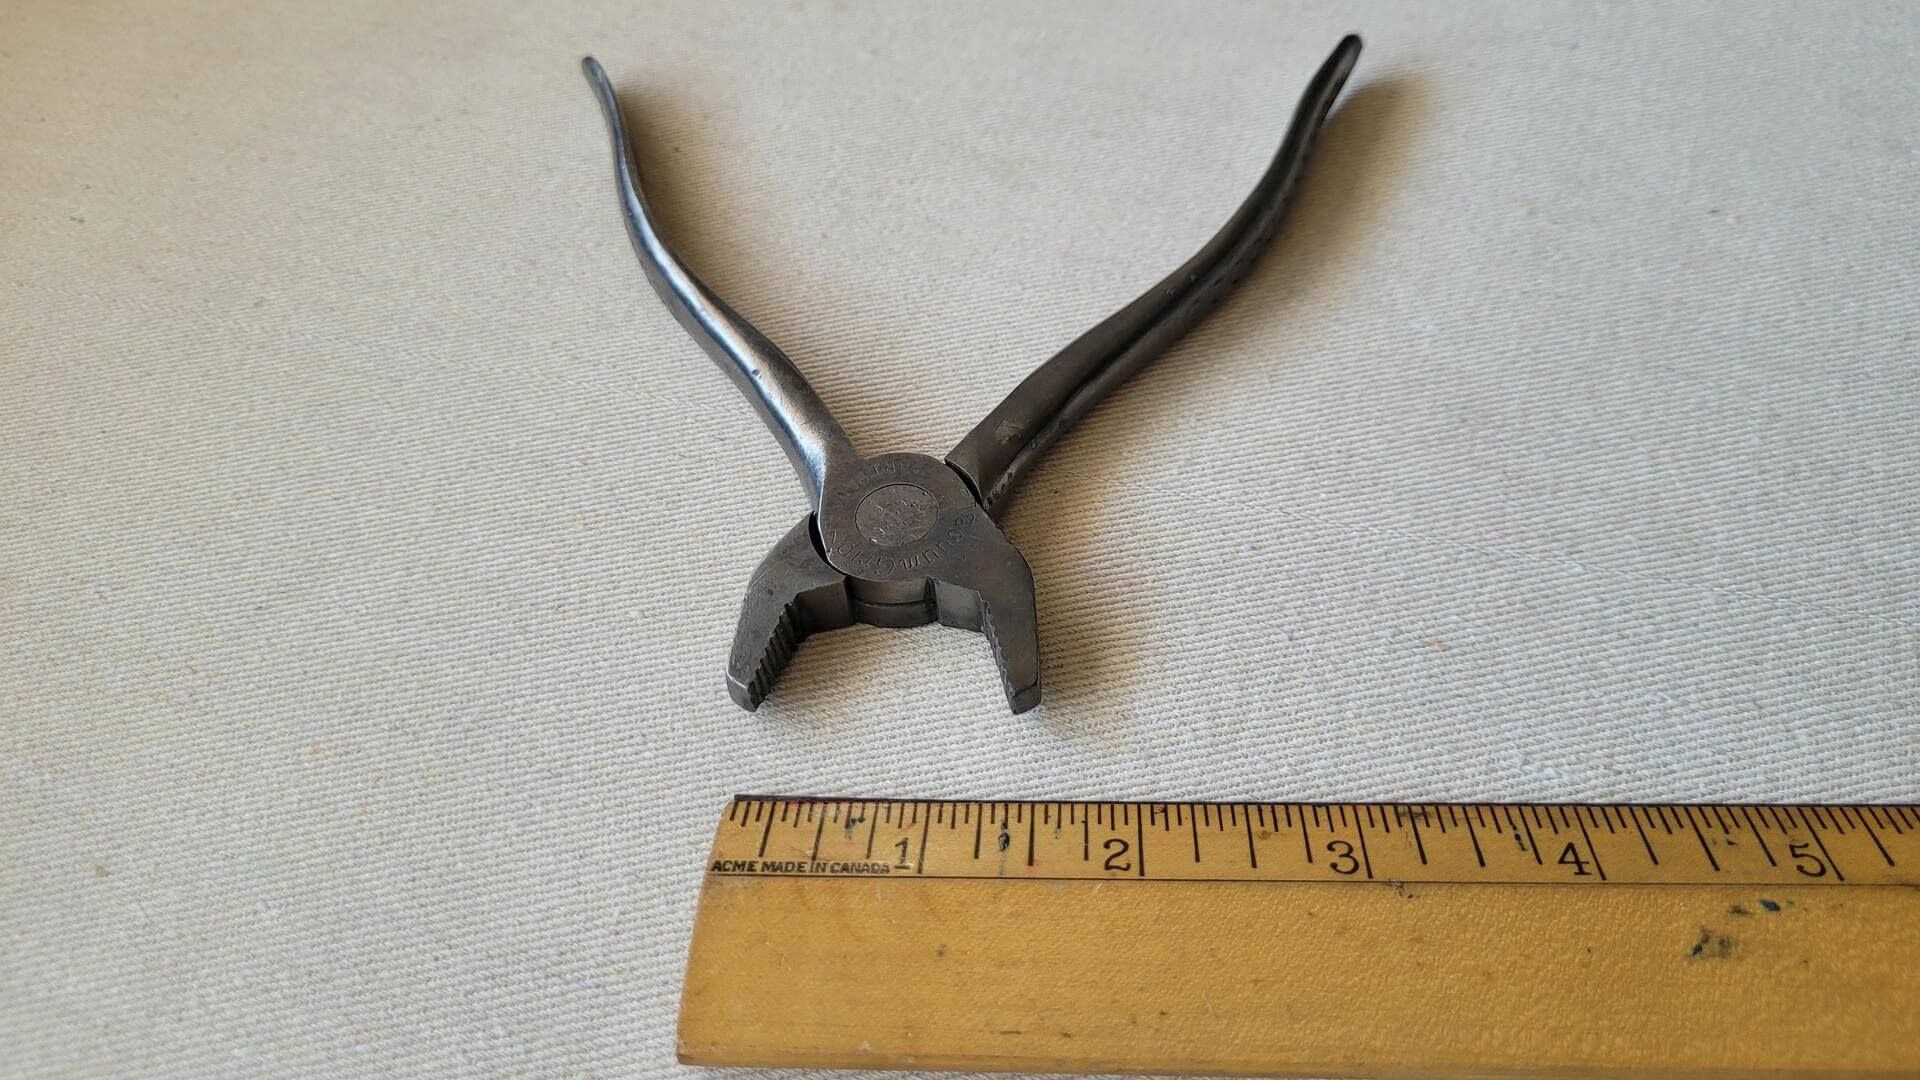 Pre Snap On Vacuum Grip No. 7 battery pliers by Forged Steel Products Company from Newport, PA. Antique made in USA automotive mechanic hand tools